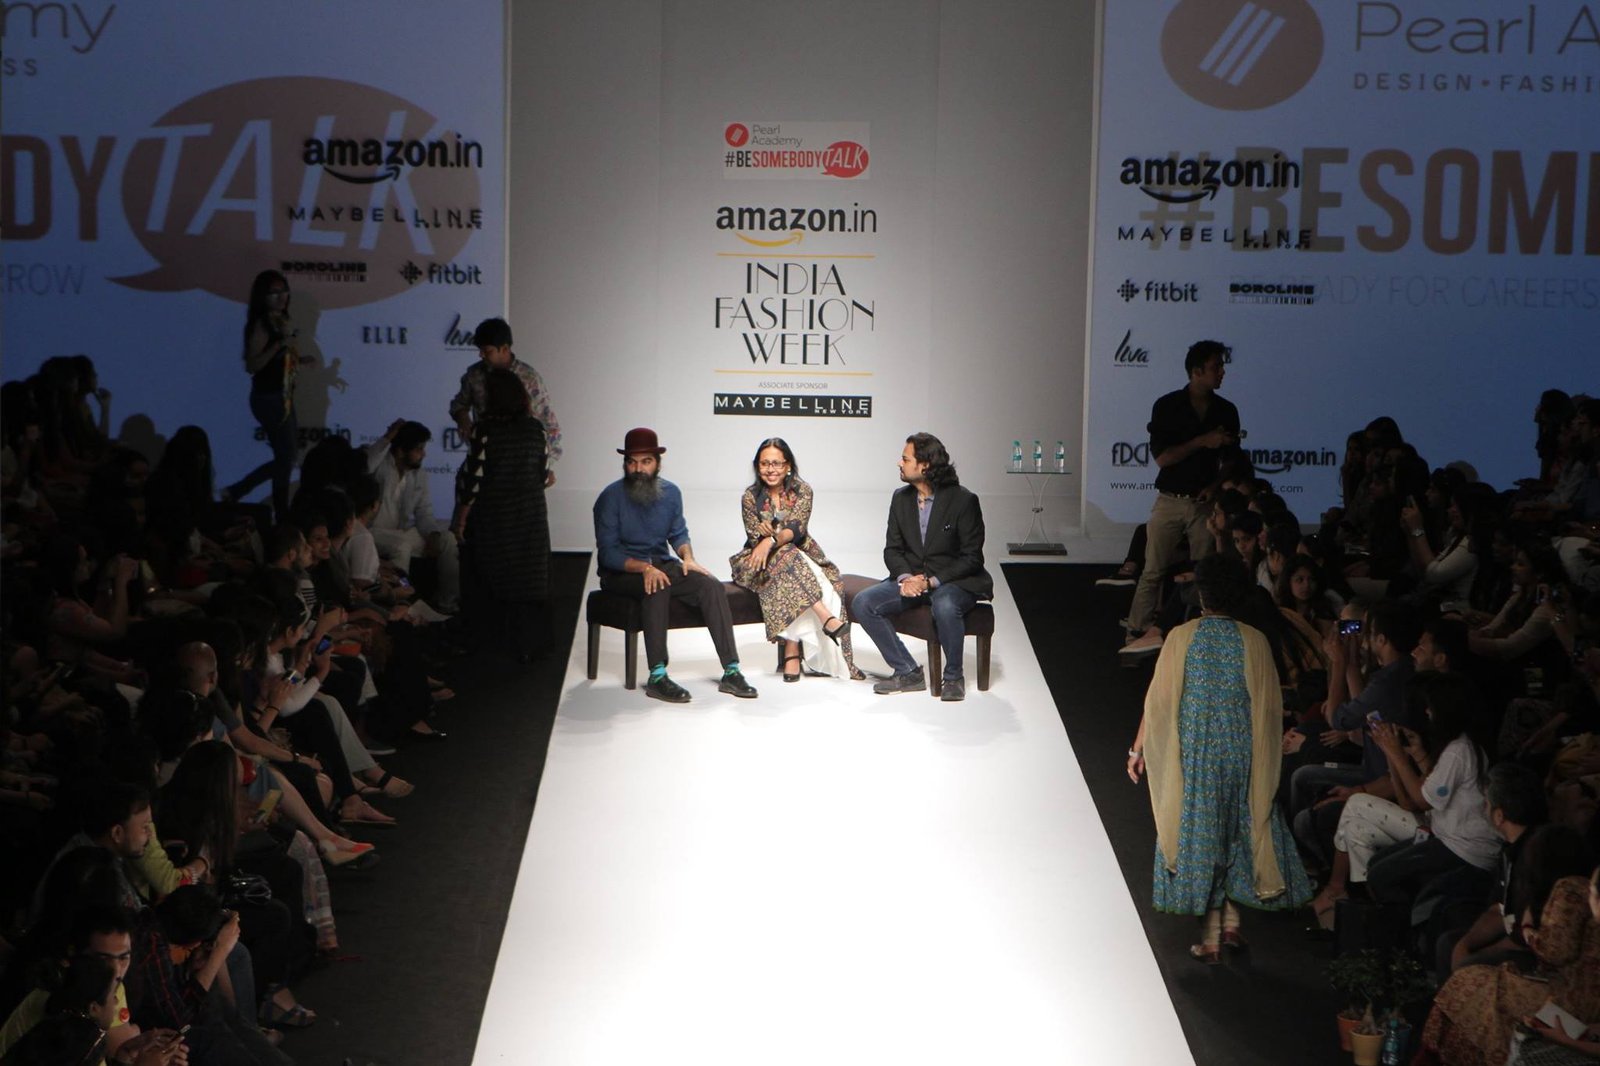 Pearl Academy at The Amazon Fashion Week 2016